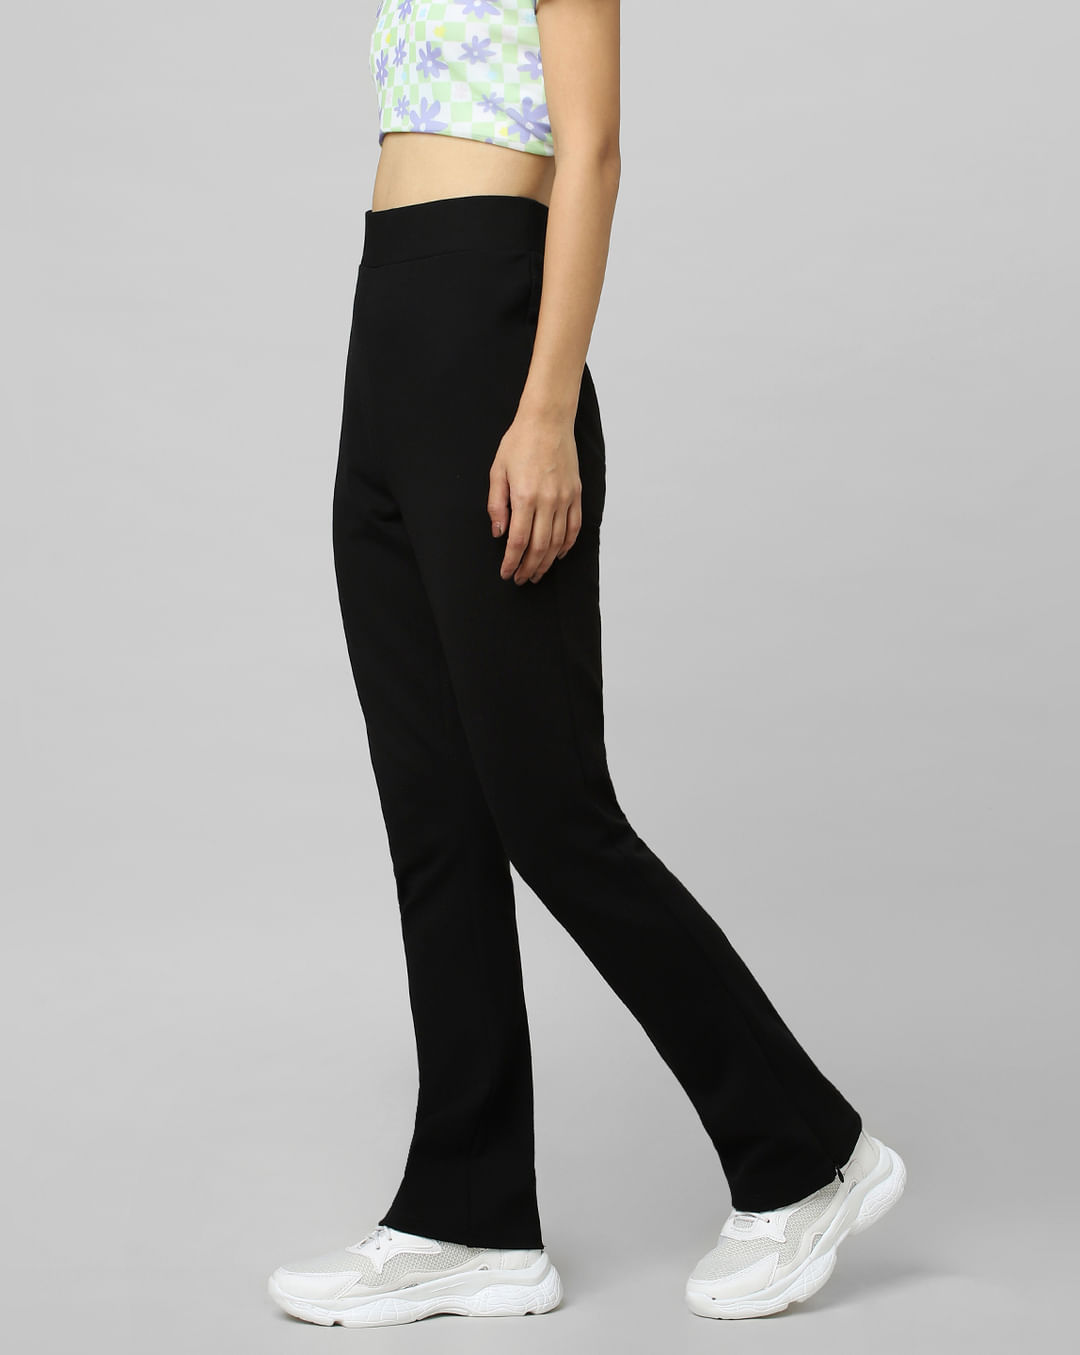 Pants & Jumpsuits, Buttery Soft Crossover Flare Leggings Size Sm